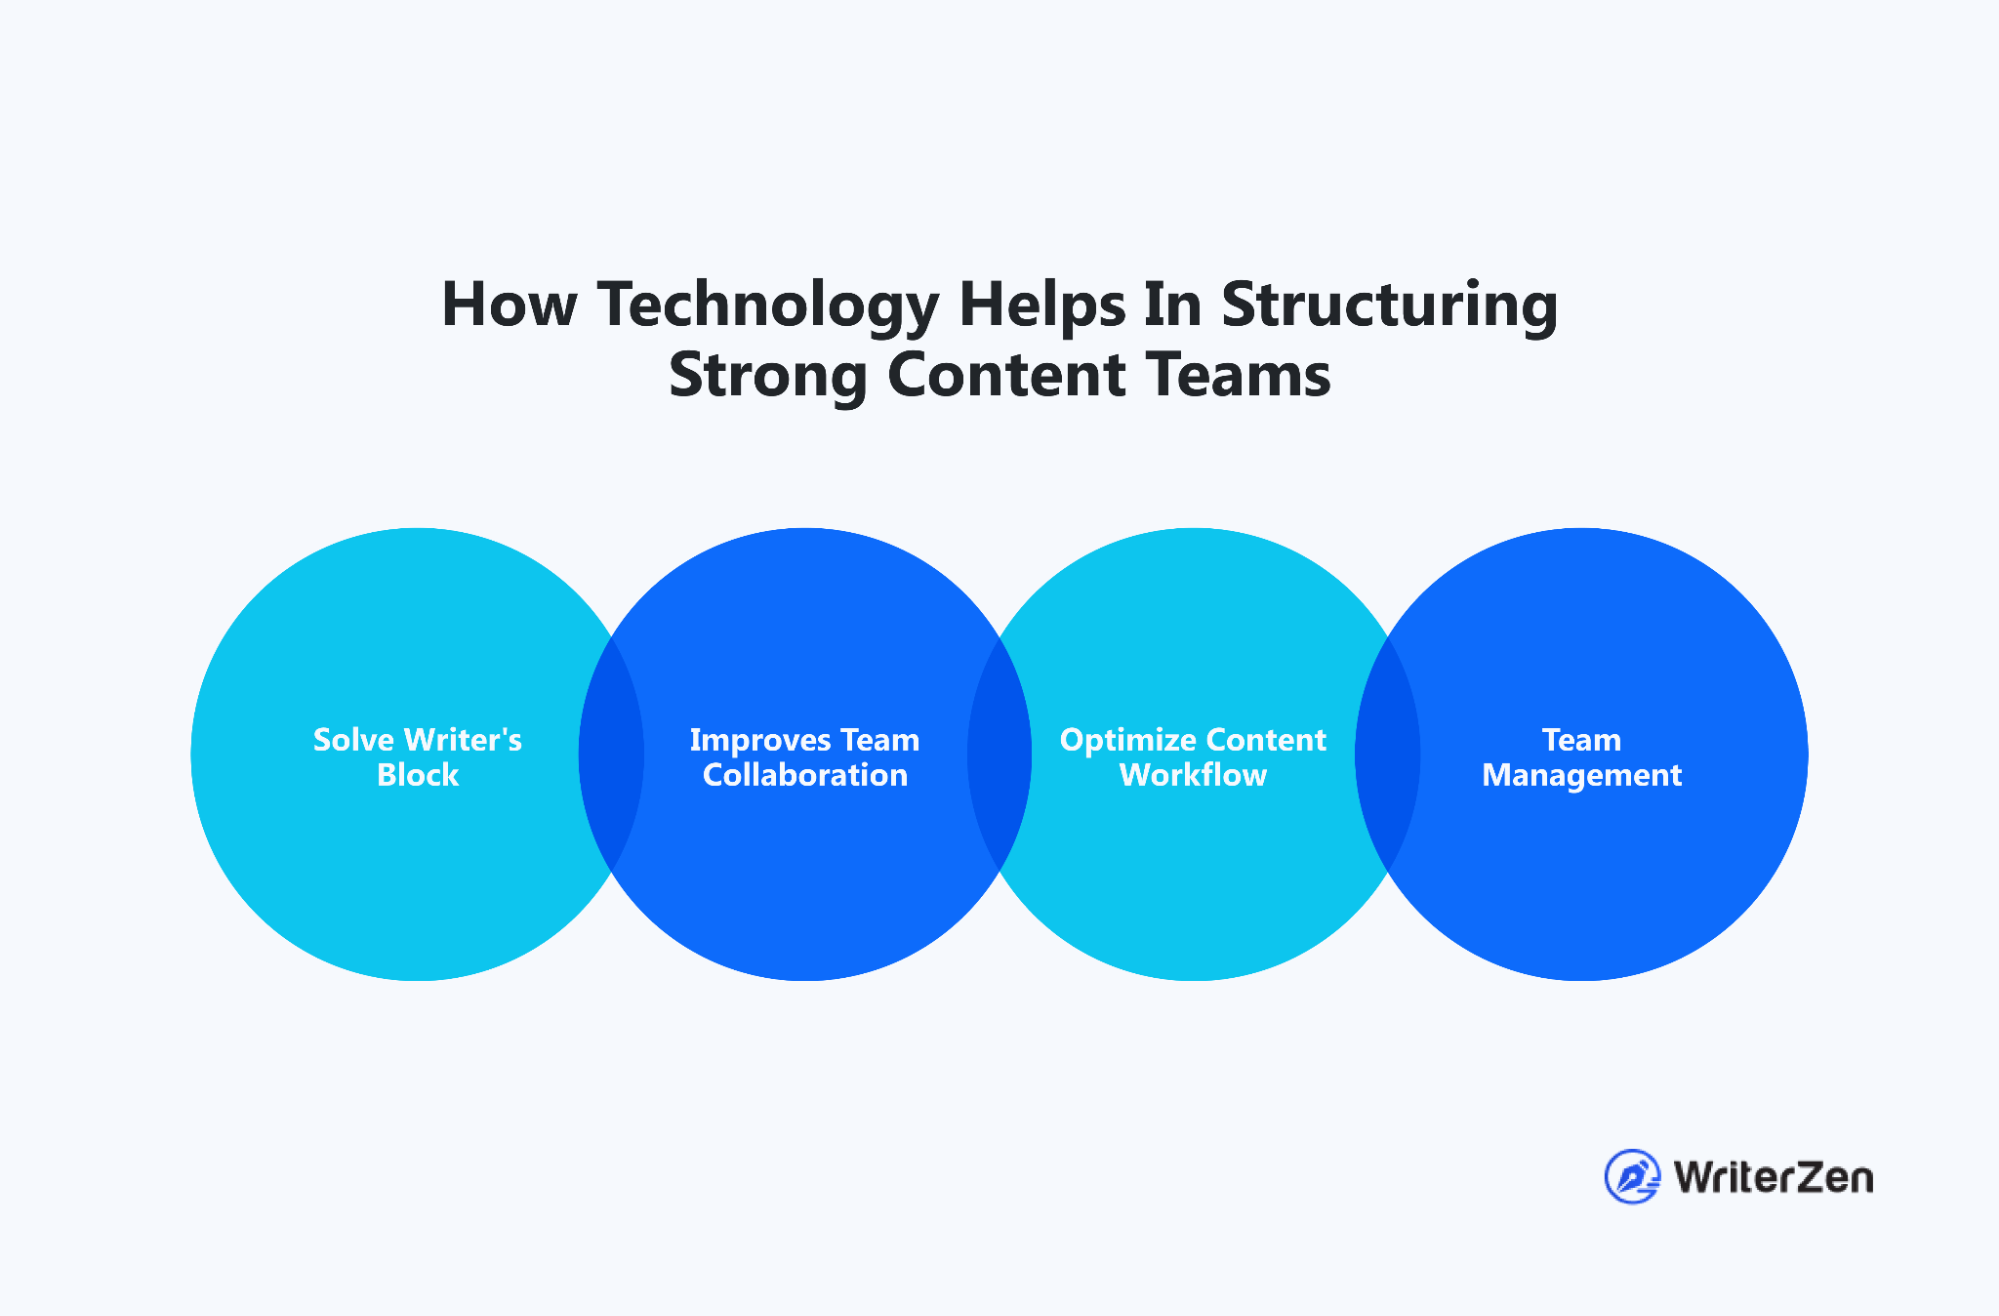 The Use Of Technology Can Strengthen Content Teams